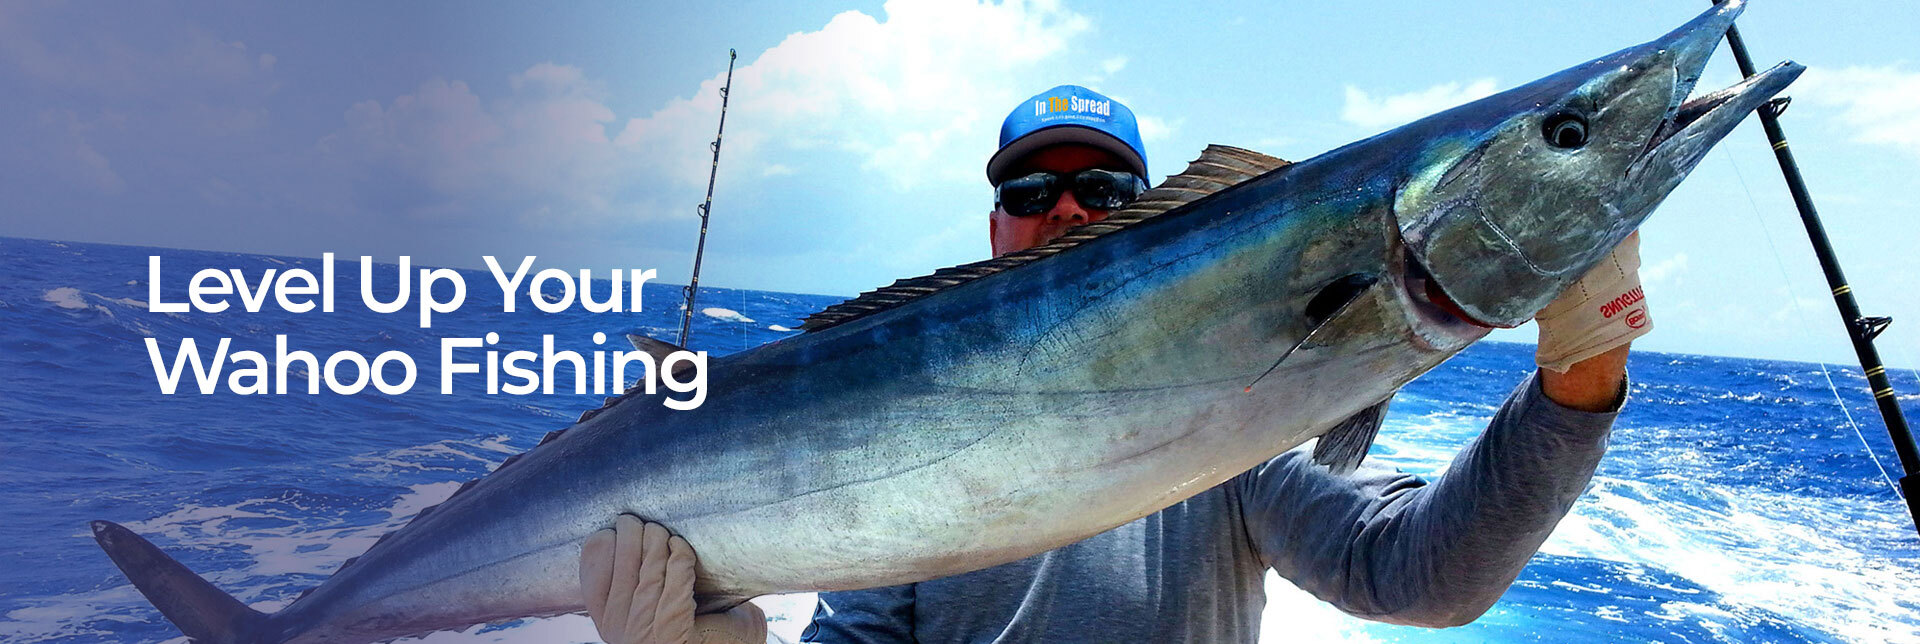 Wahoo – Level Up Your Wahoo Fishing, In the Spread Home Slider